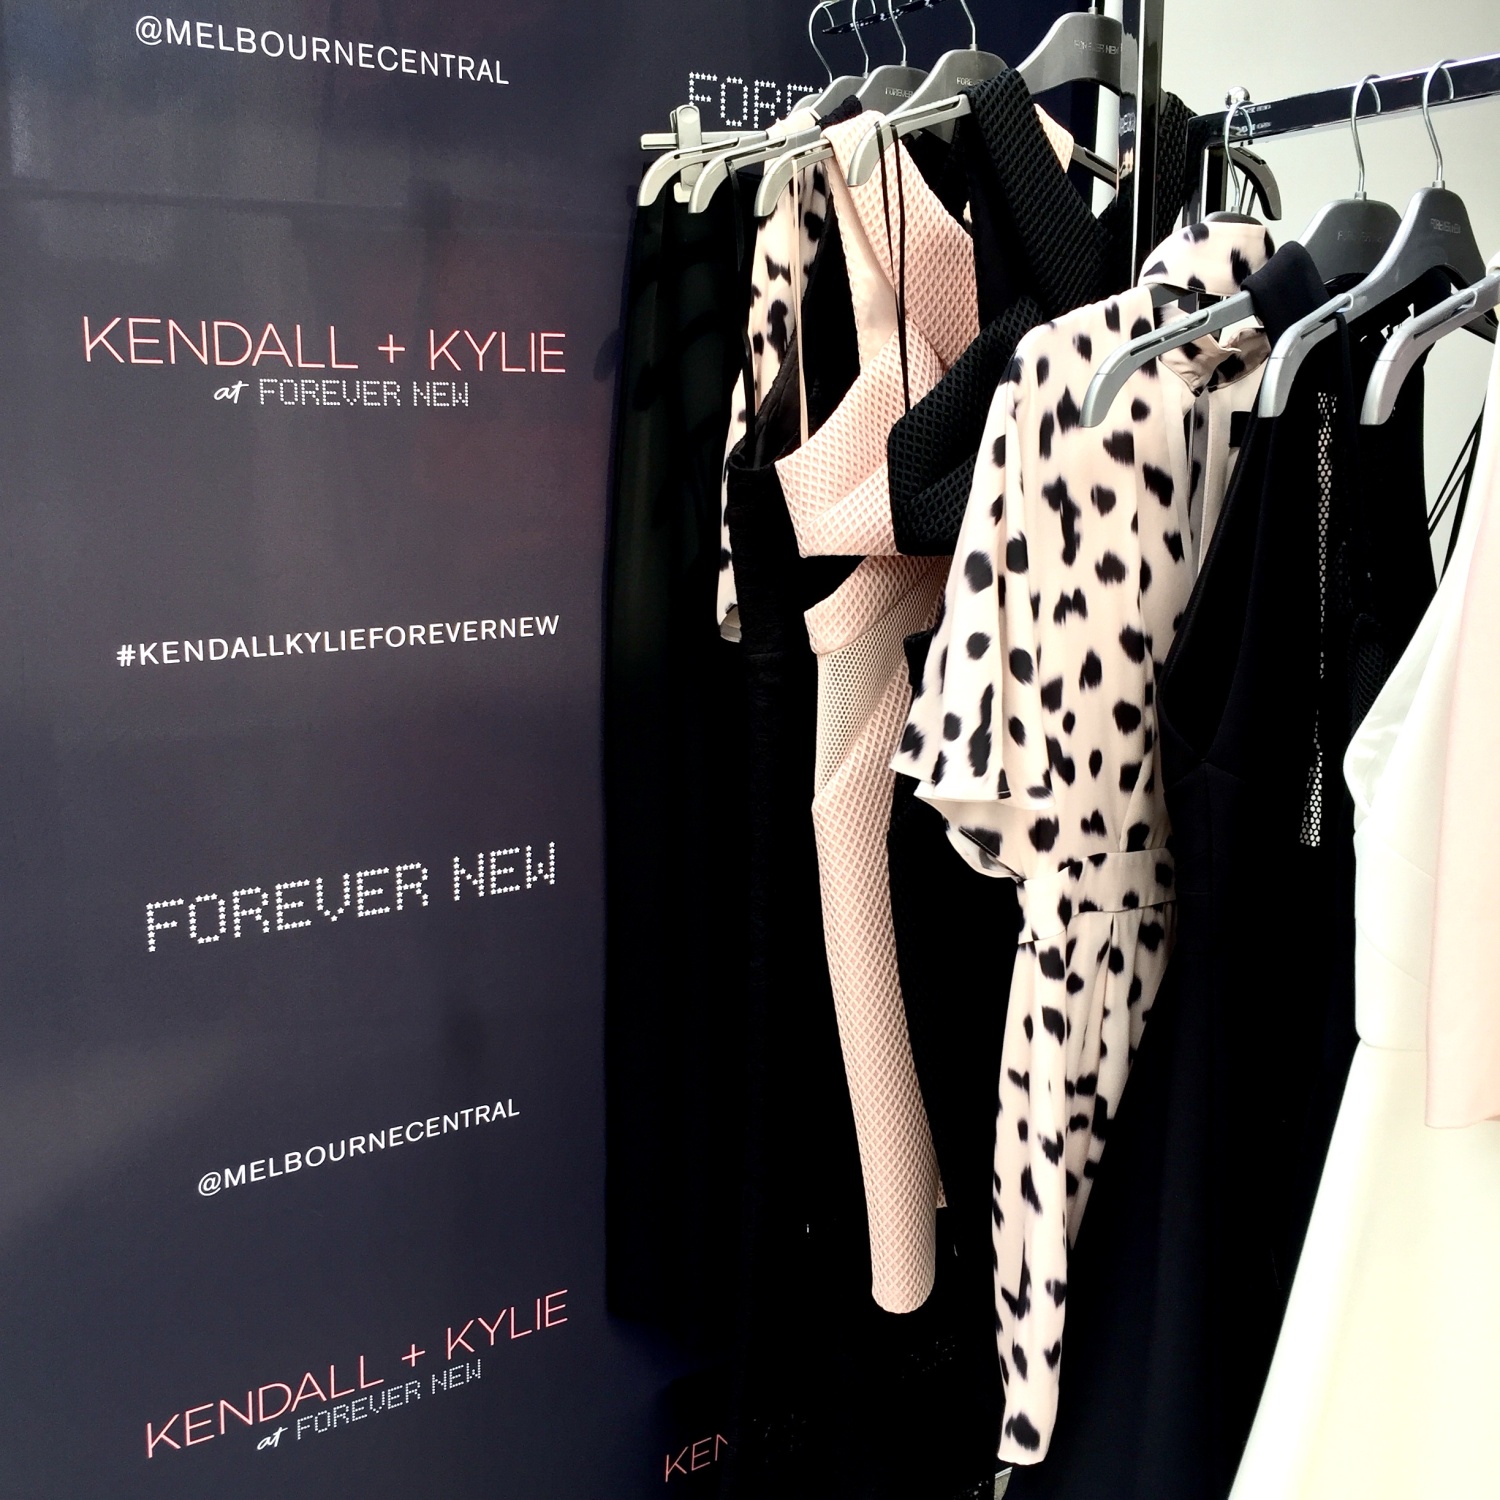 Kendall + Kylie for Forever New, On The List Melbourne, Melbourne Central